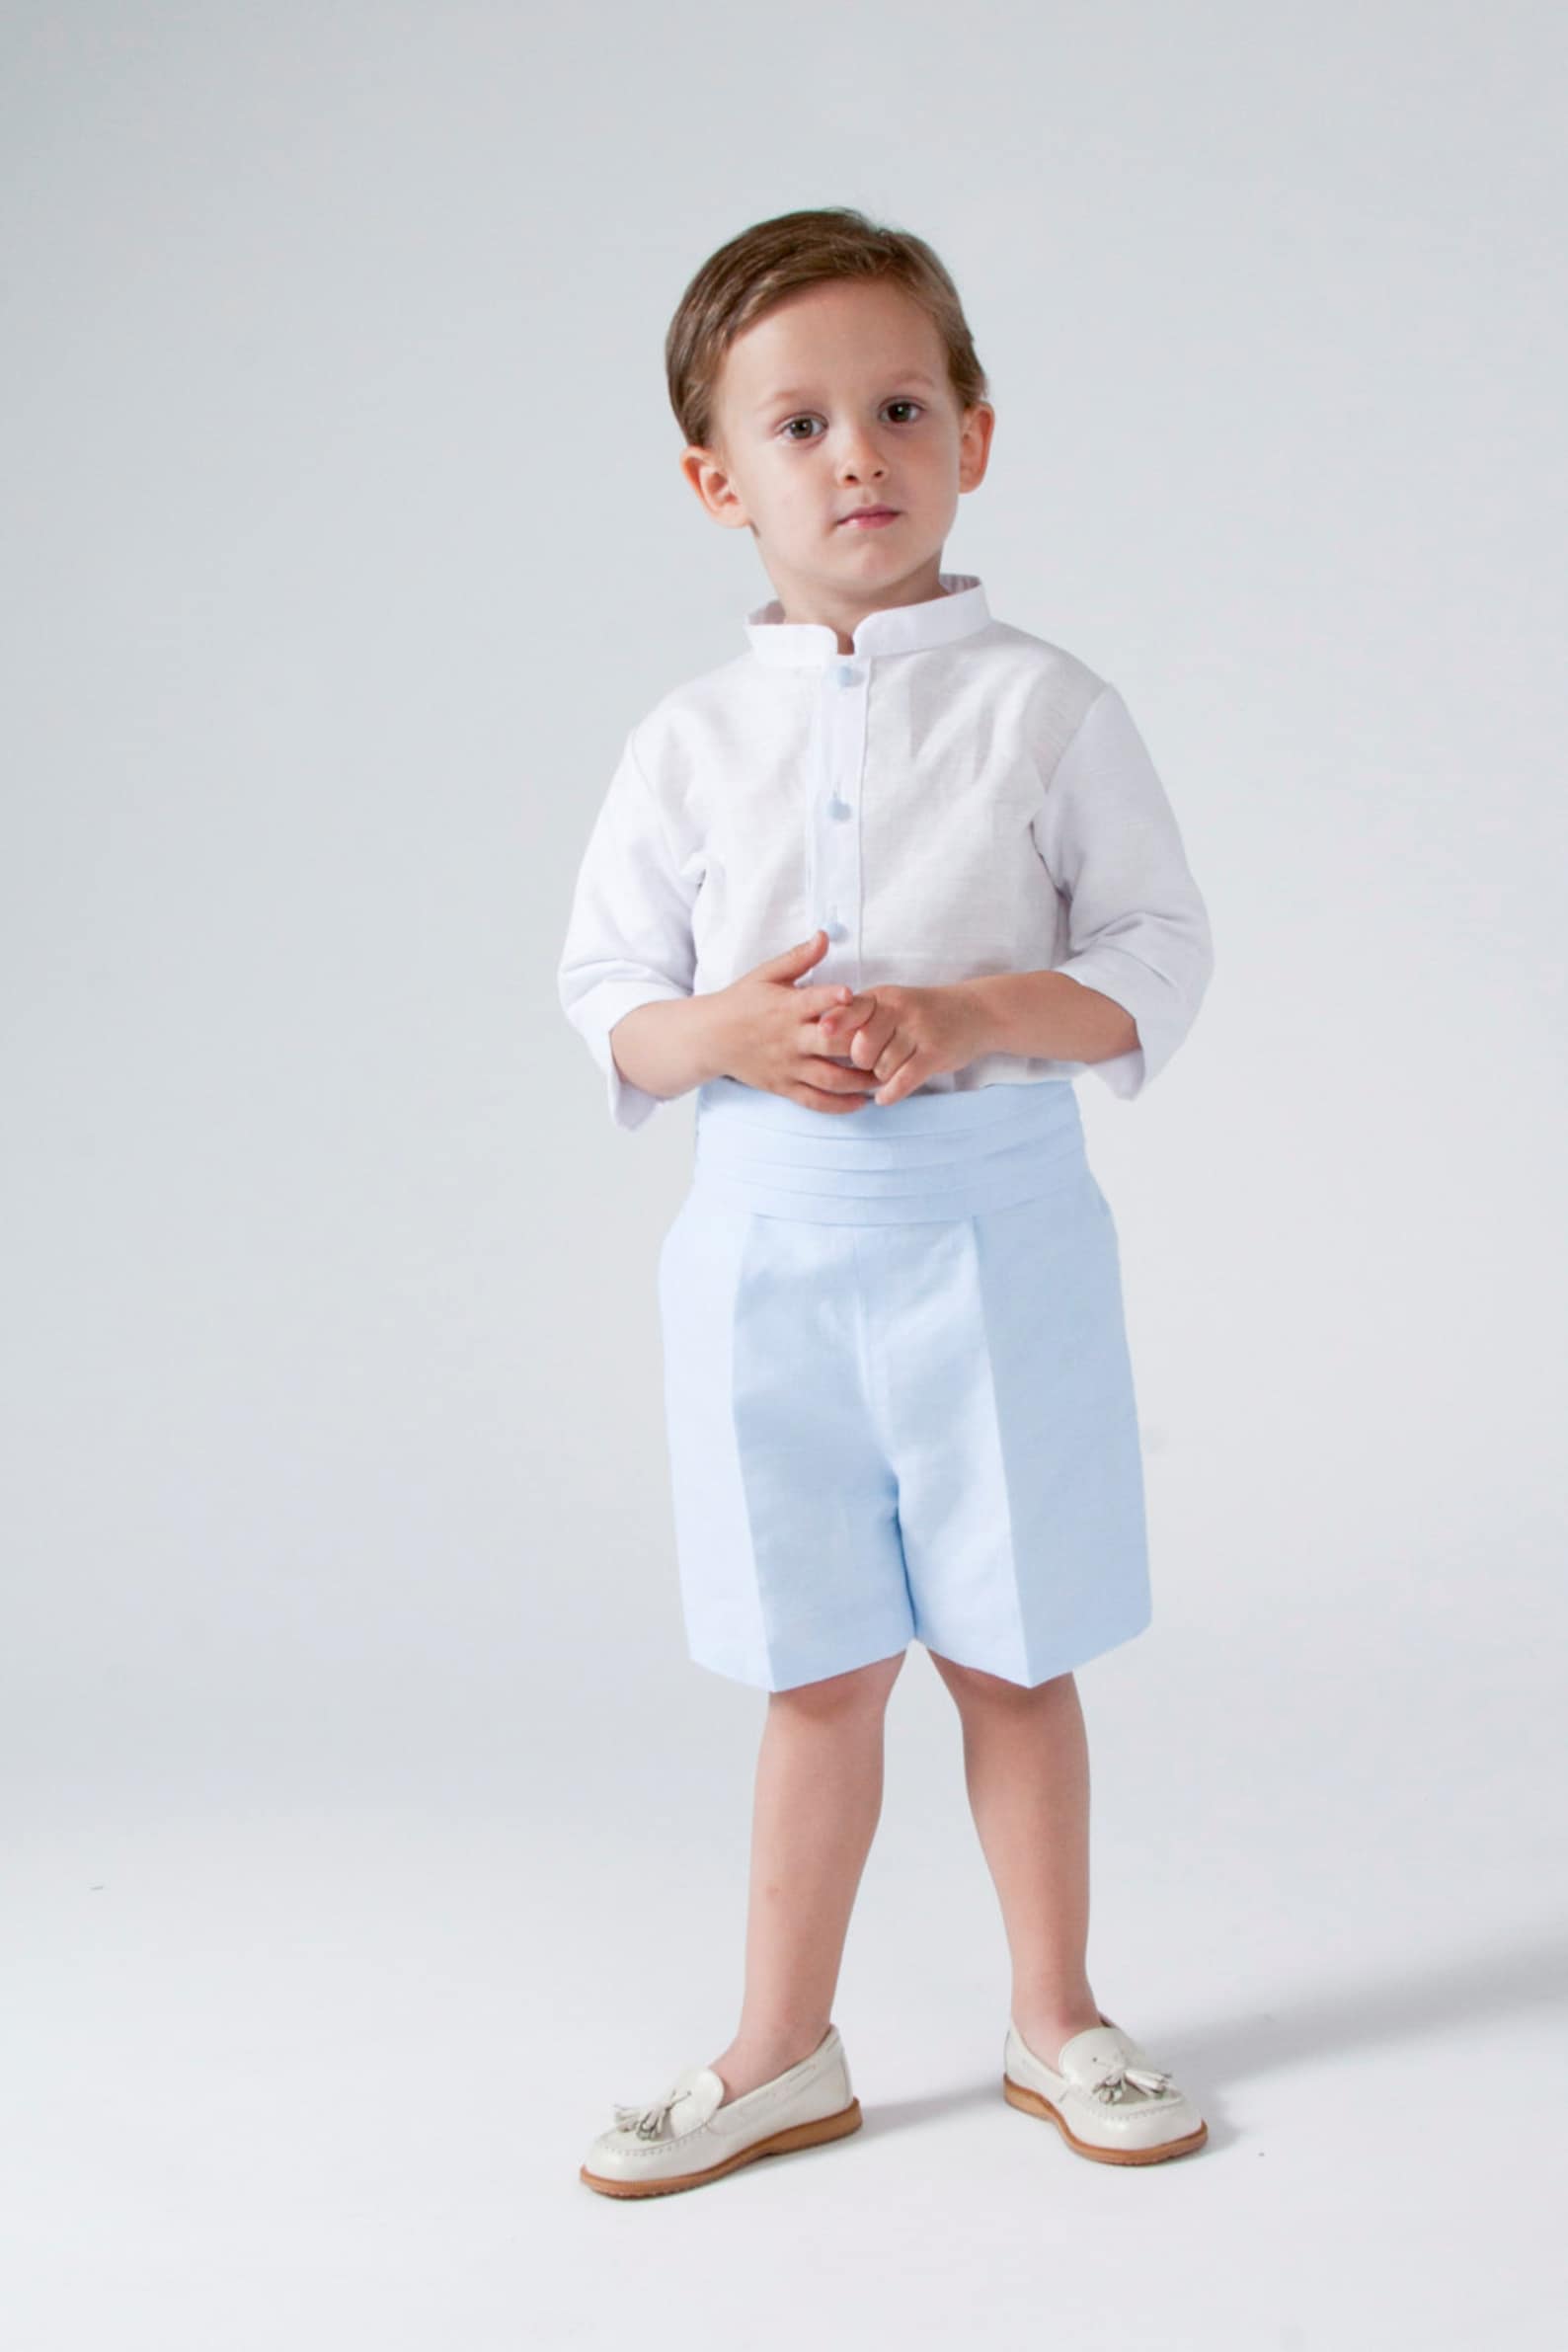 Boy Suit in Pale Blue Linen With White Linen Shirt. Perfect | Etsy